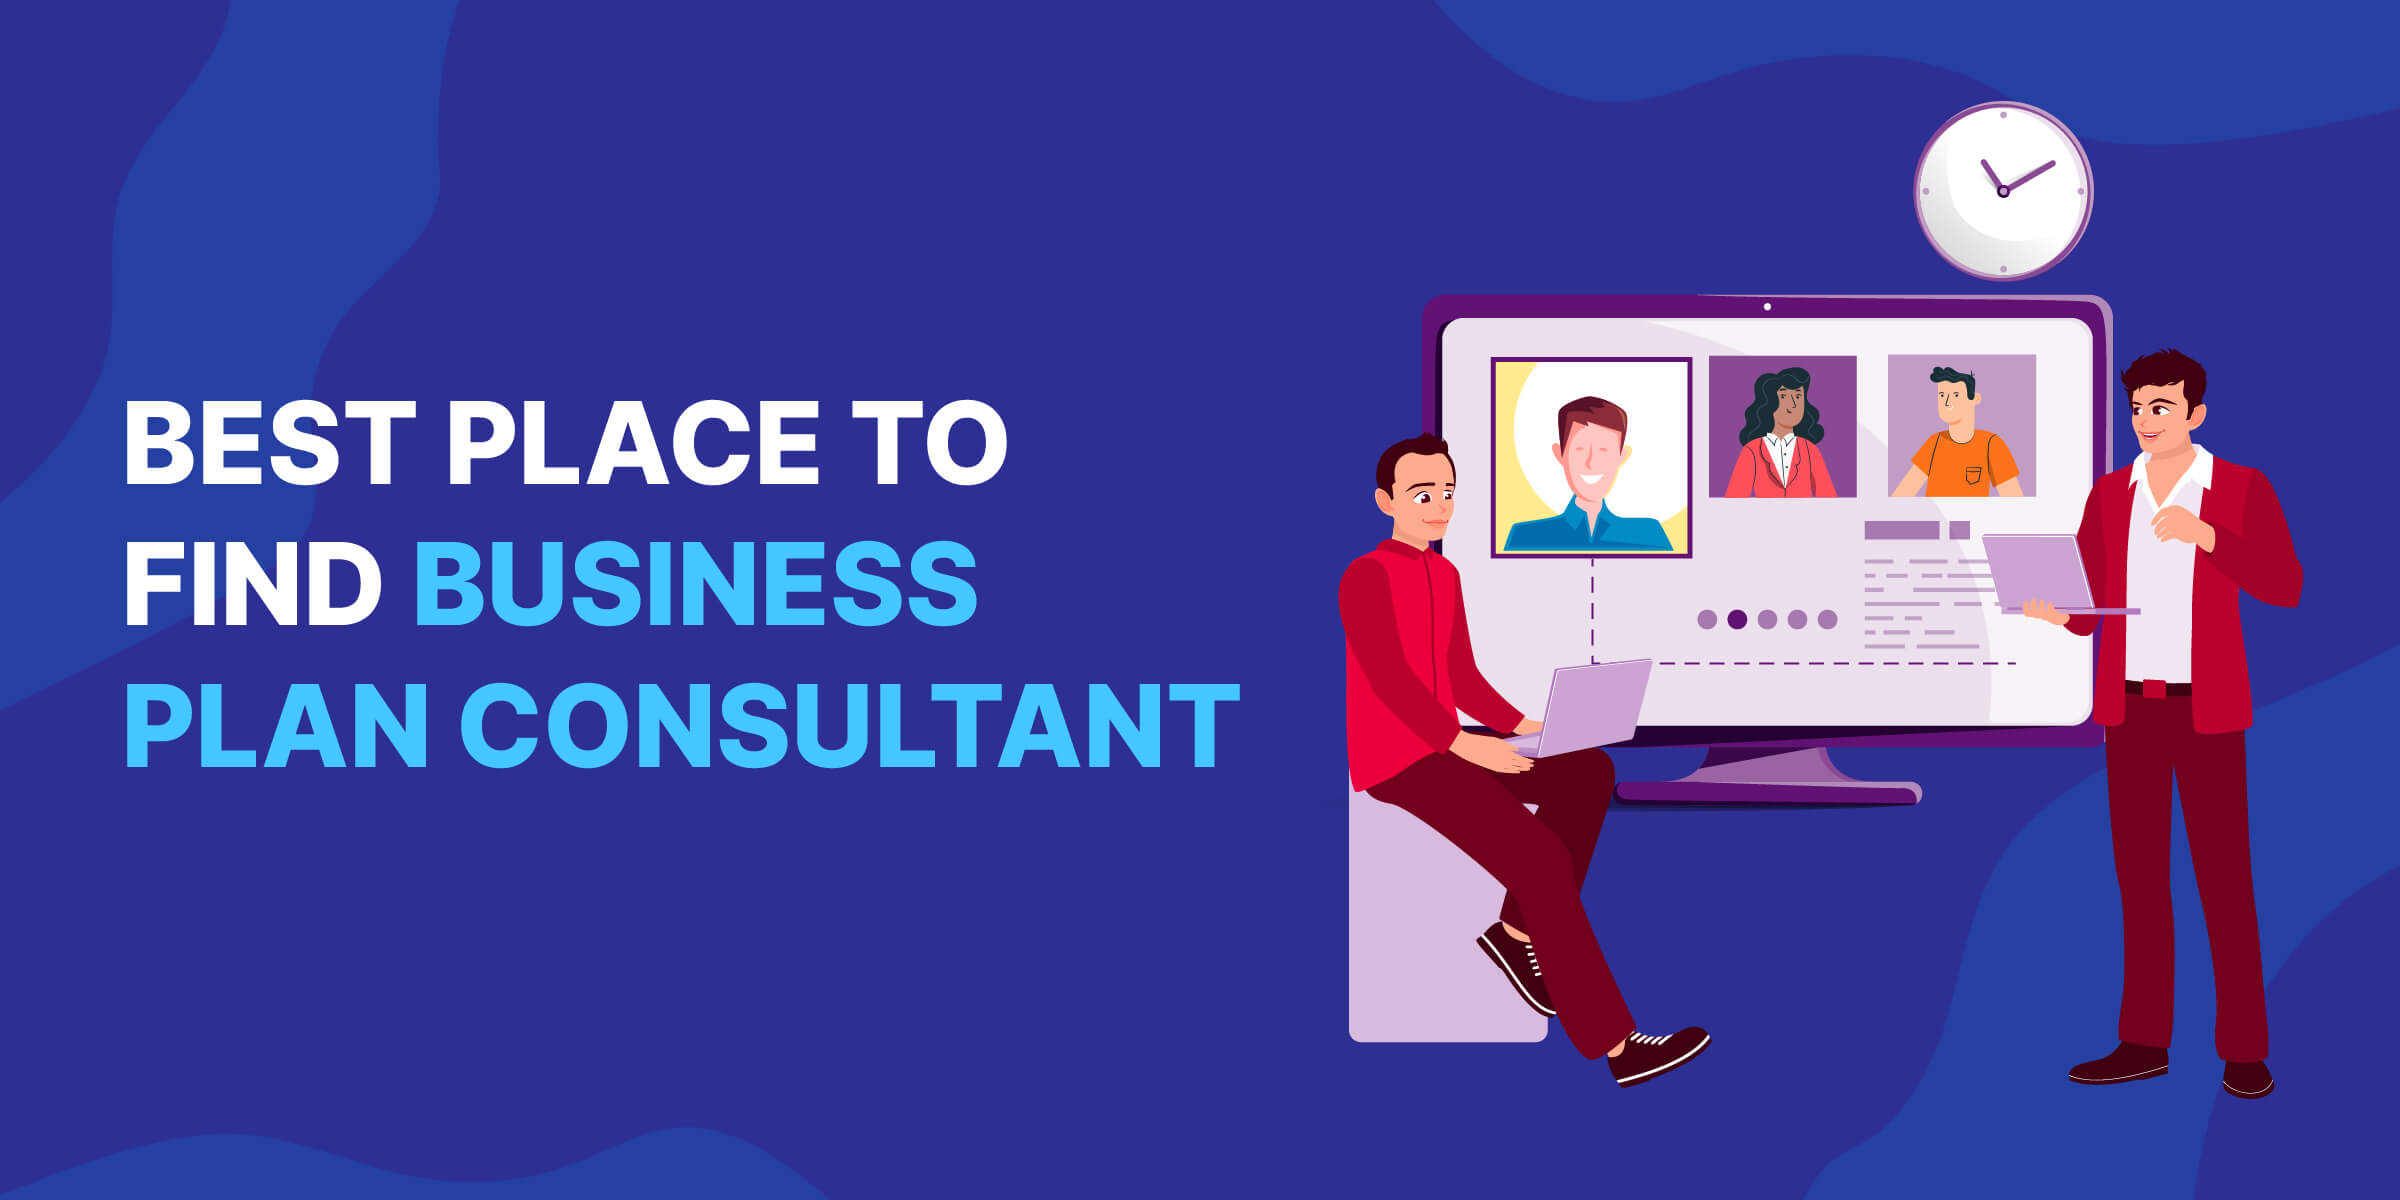 Best Place to Find Business Plan Consultant